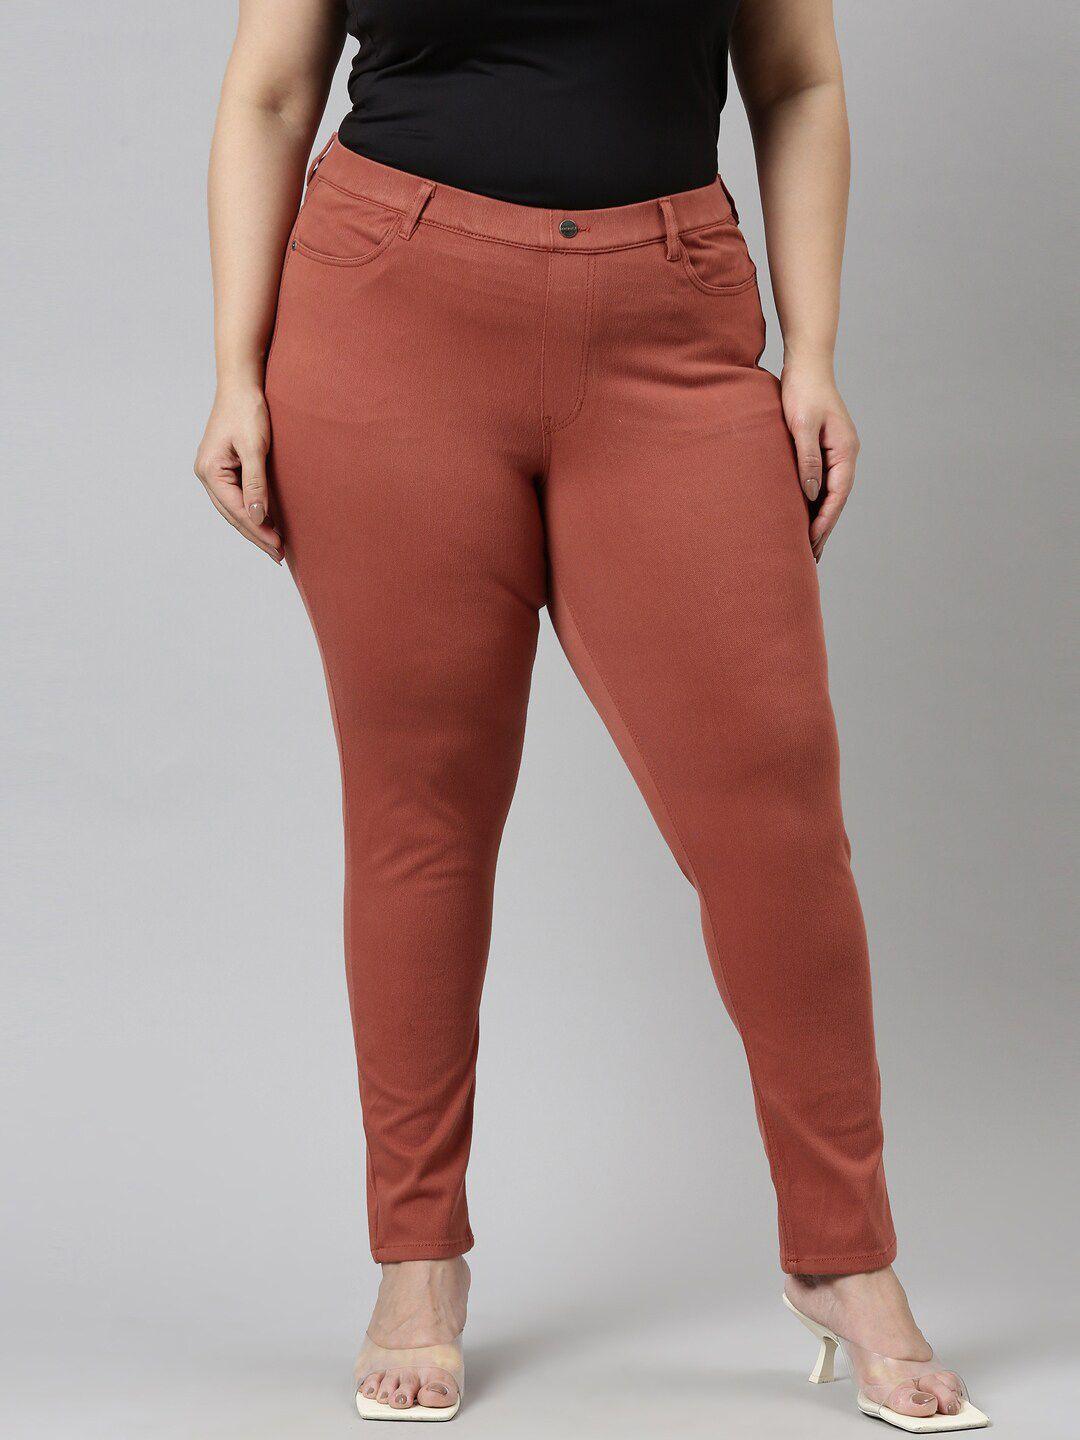 Go Colors Women Rust Colored Solid Slim-Fit Jeggings